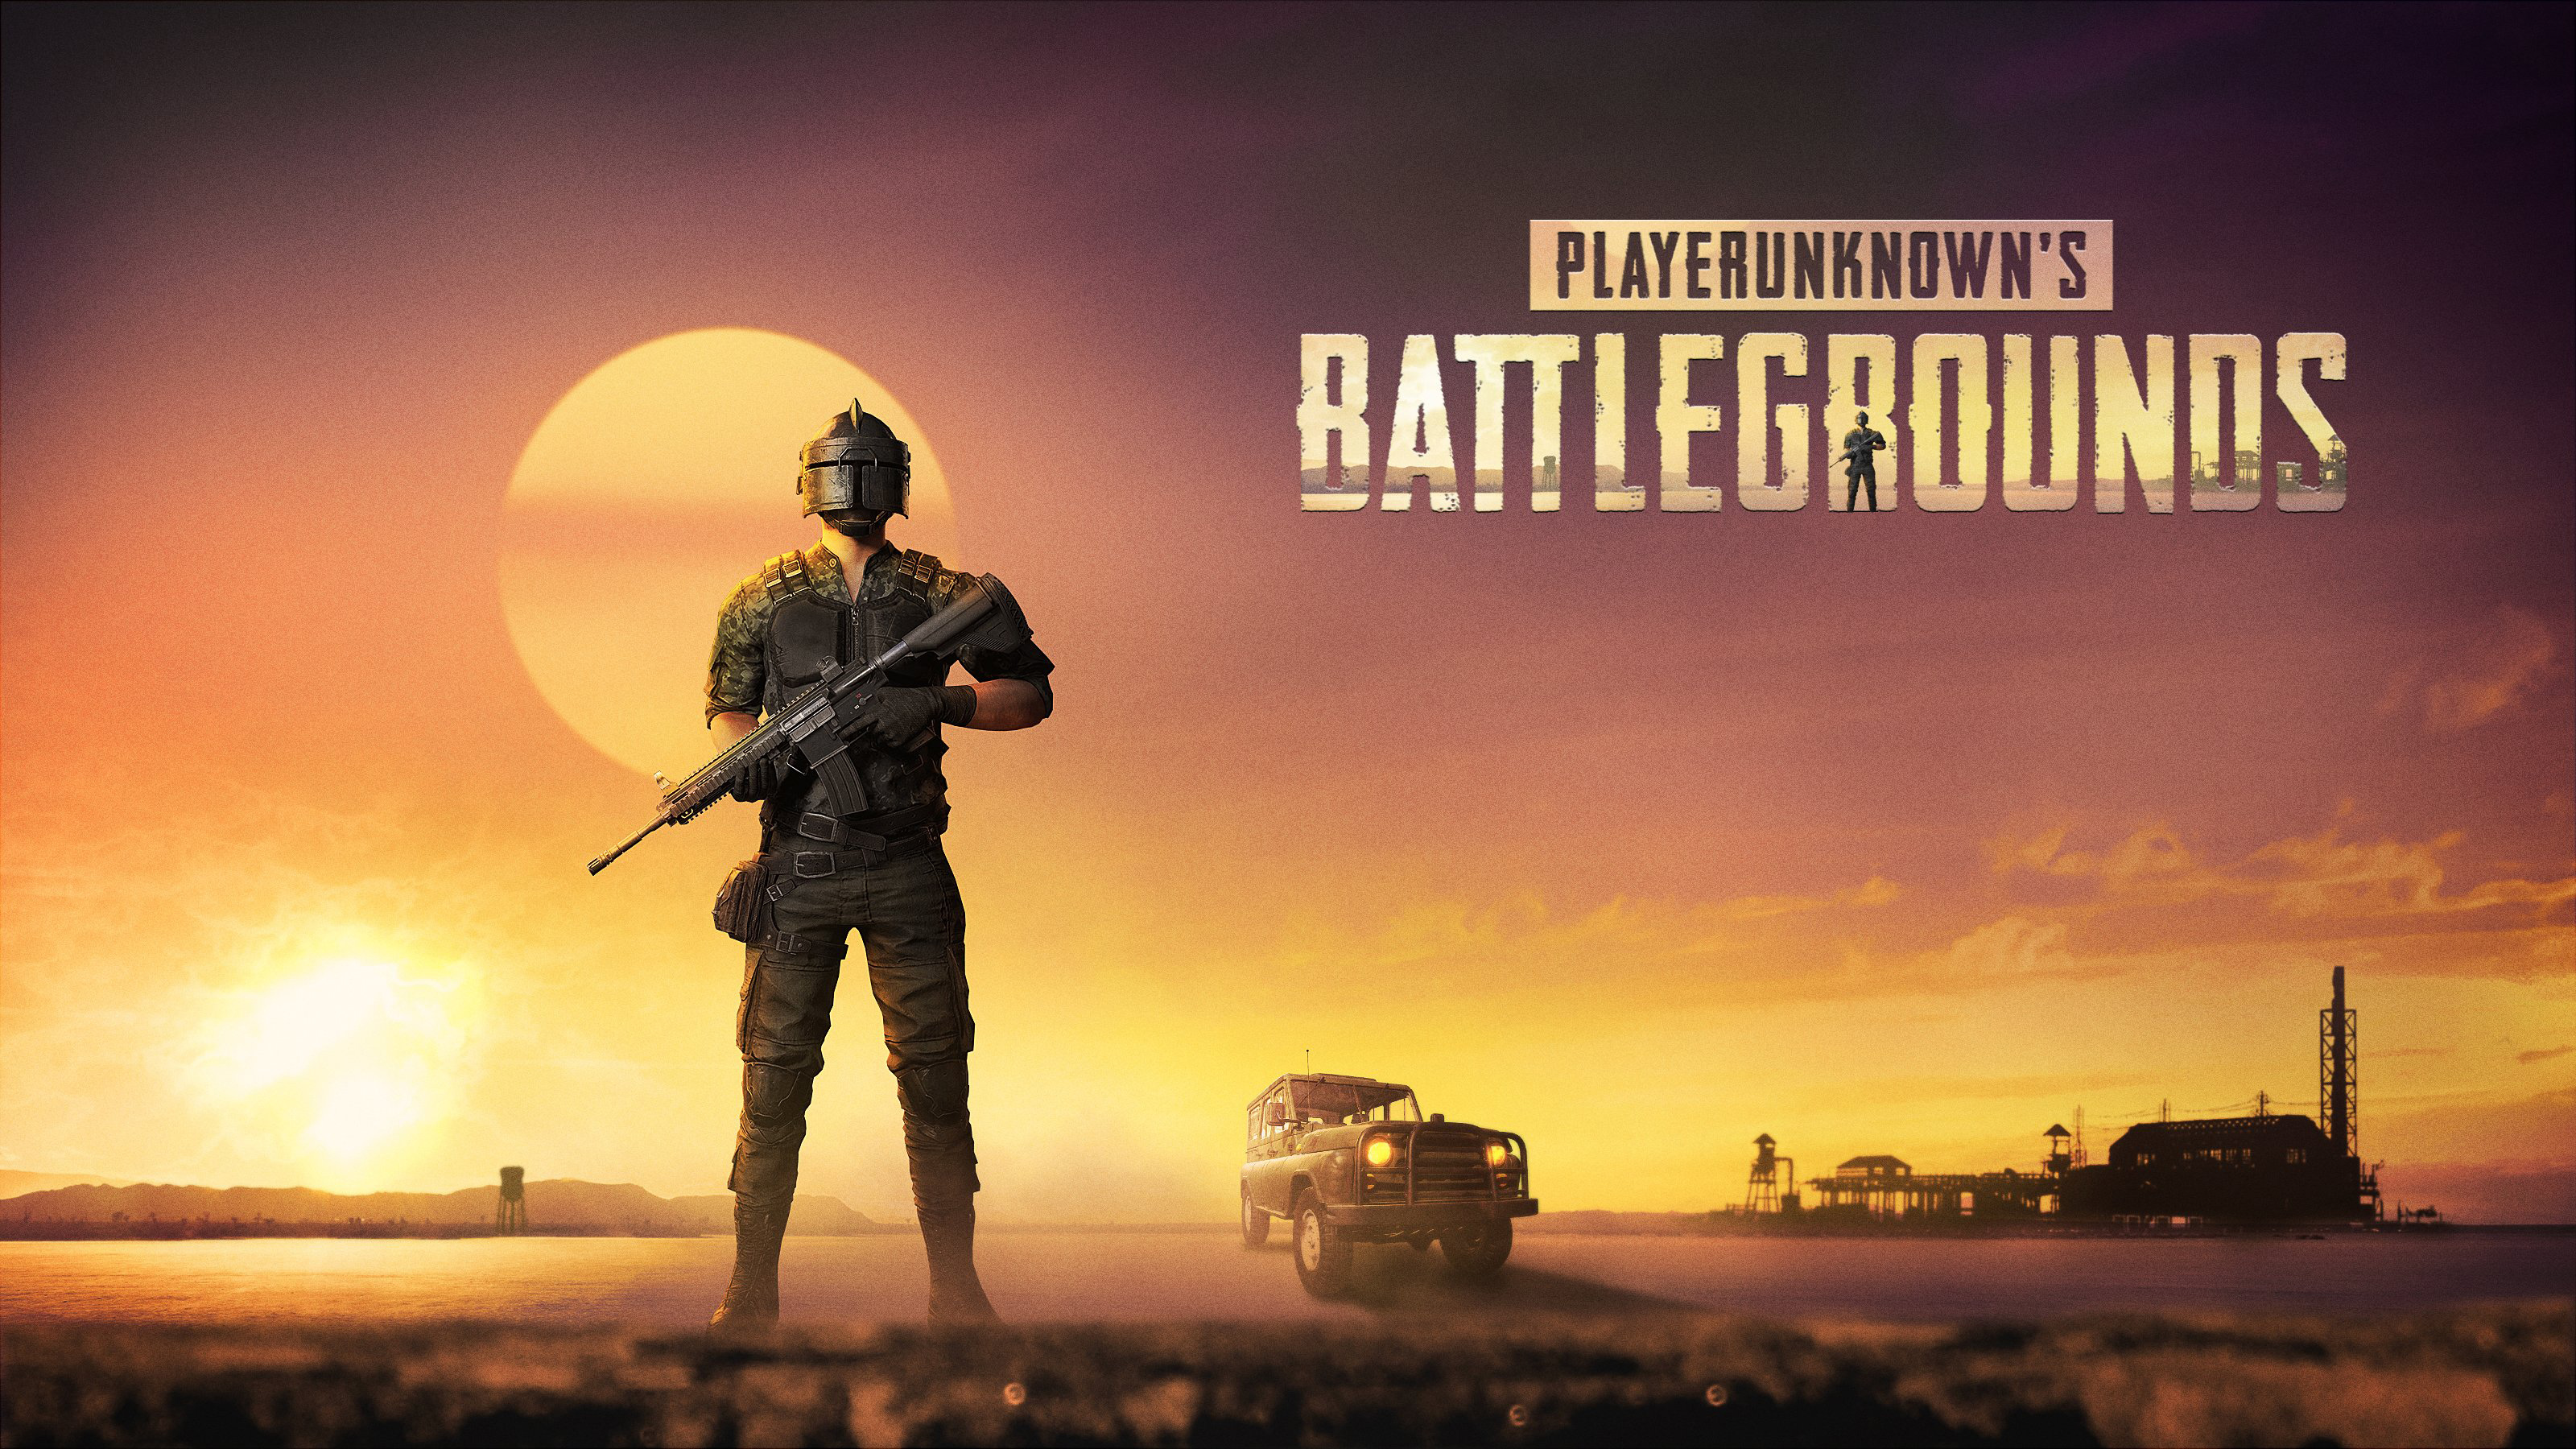 Video Game PlayerUnknown's Battlegrounds HD Wallpaper | Background Image